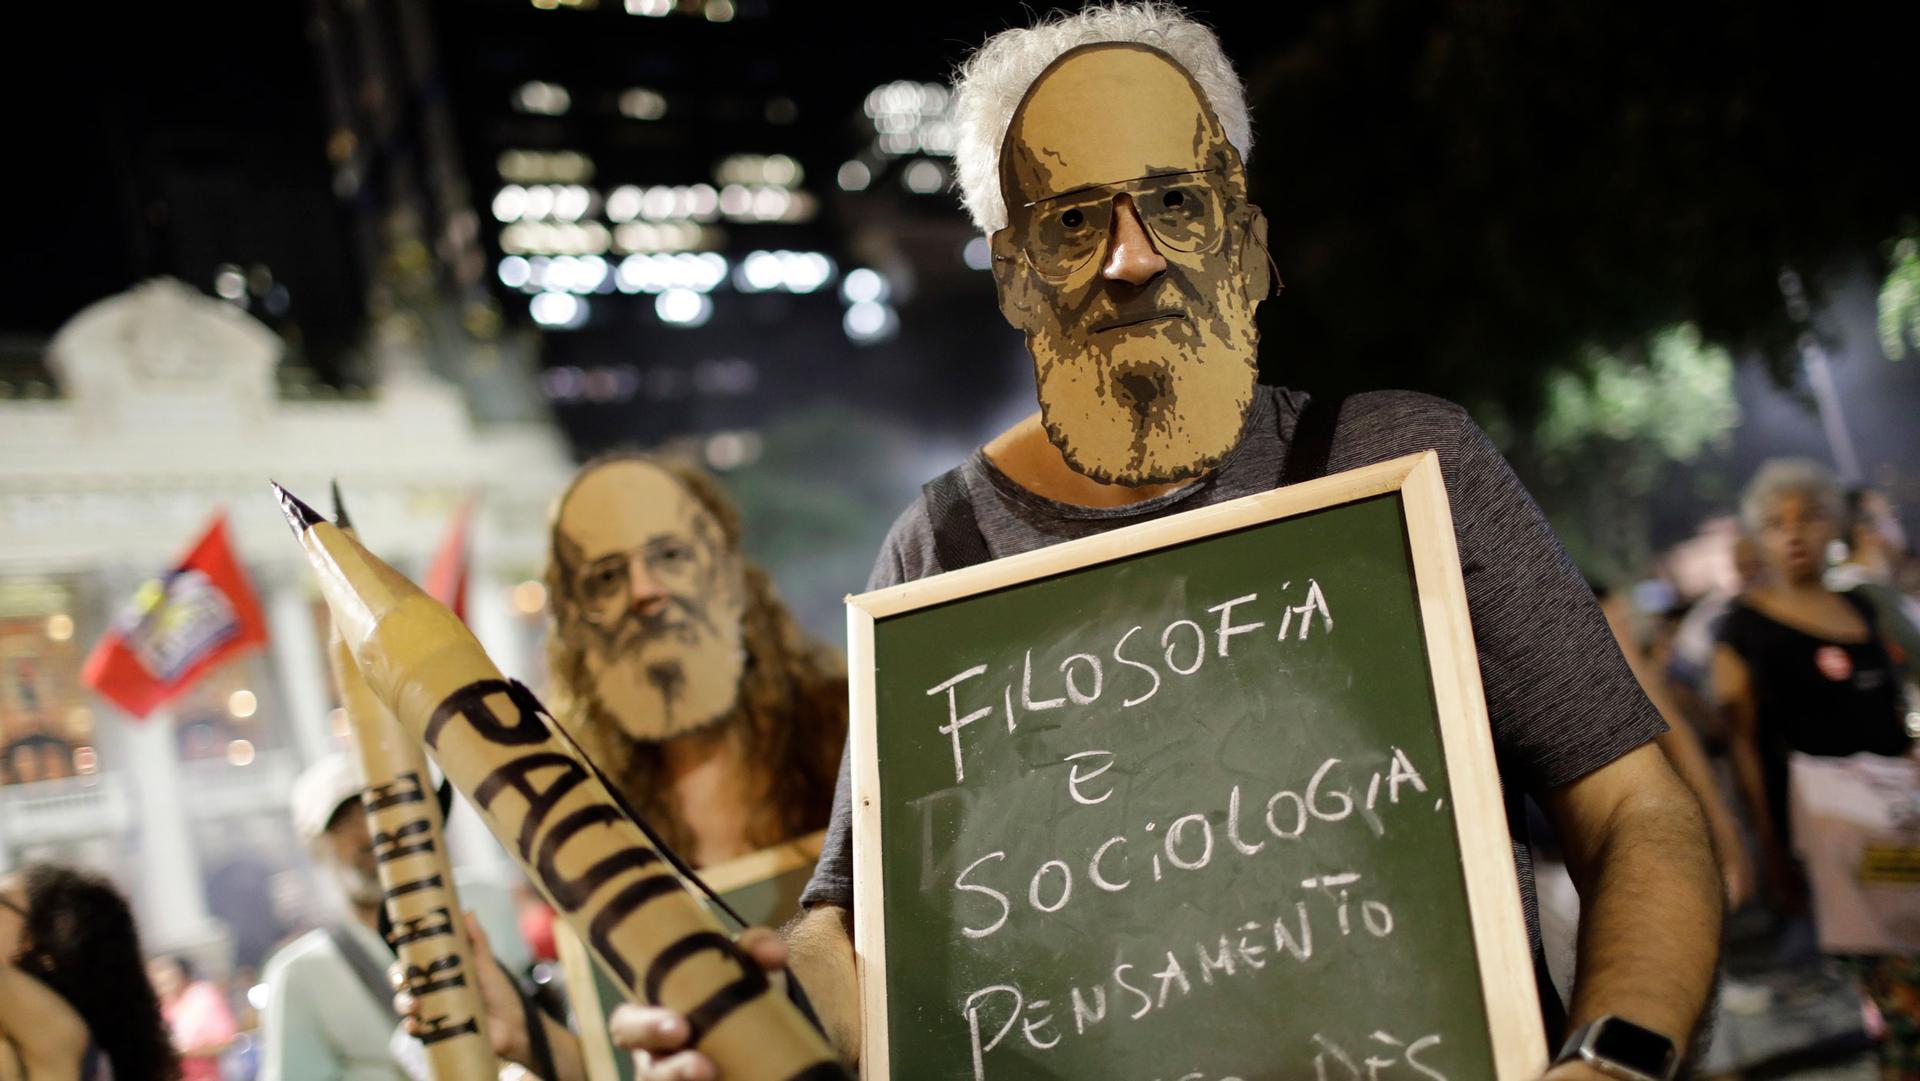 People wear masks of Paulo Freire during a protest against a massive cut in the education budget imposed by the administration of Brazilian President Jair Bolsonaro at Cinelandia square, in Rio de Janeiro, Brazil, Thursday, May 30, 2019.